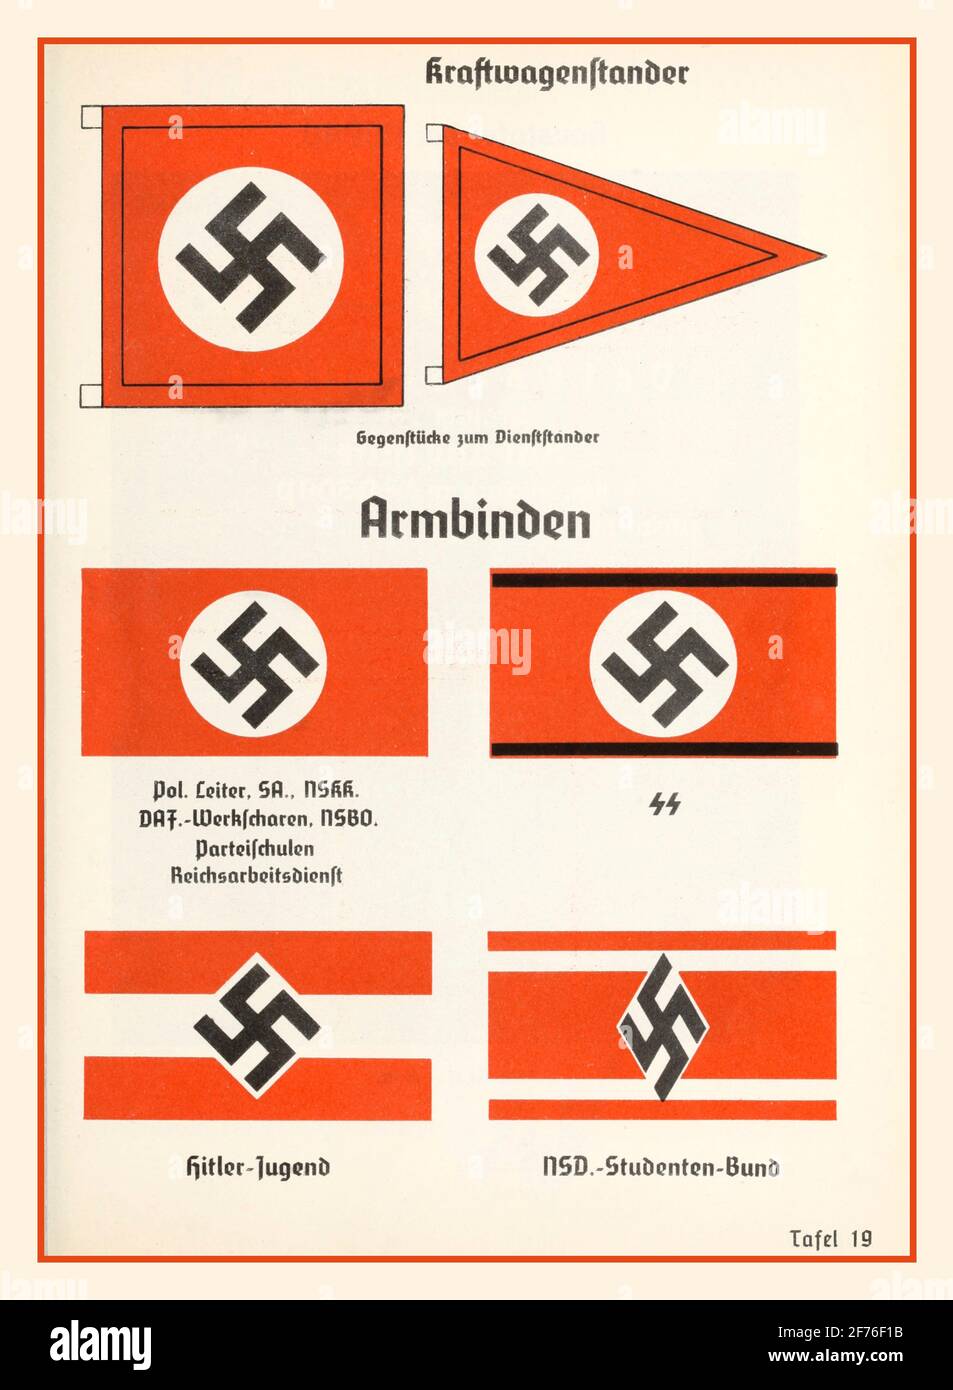 Nazi Swastika Official Illustration from the Nazi Party handbook 1936,  showing flags, emblems, signs, badges, ranks, insignia, uniforms, etc.:Car  flags Swastika armbands (brassards) Political leaders (Politischer Leiter),  SA (Sturmabteilung), National ...